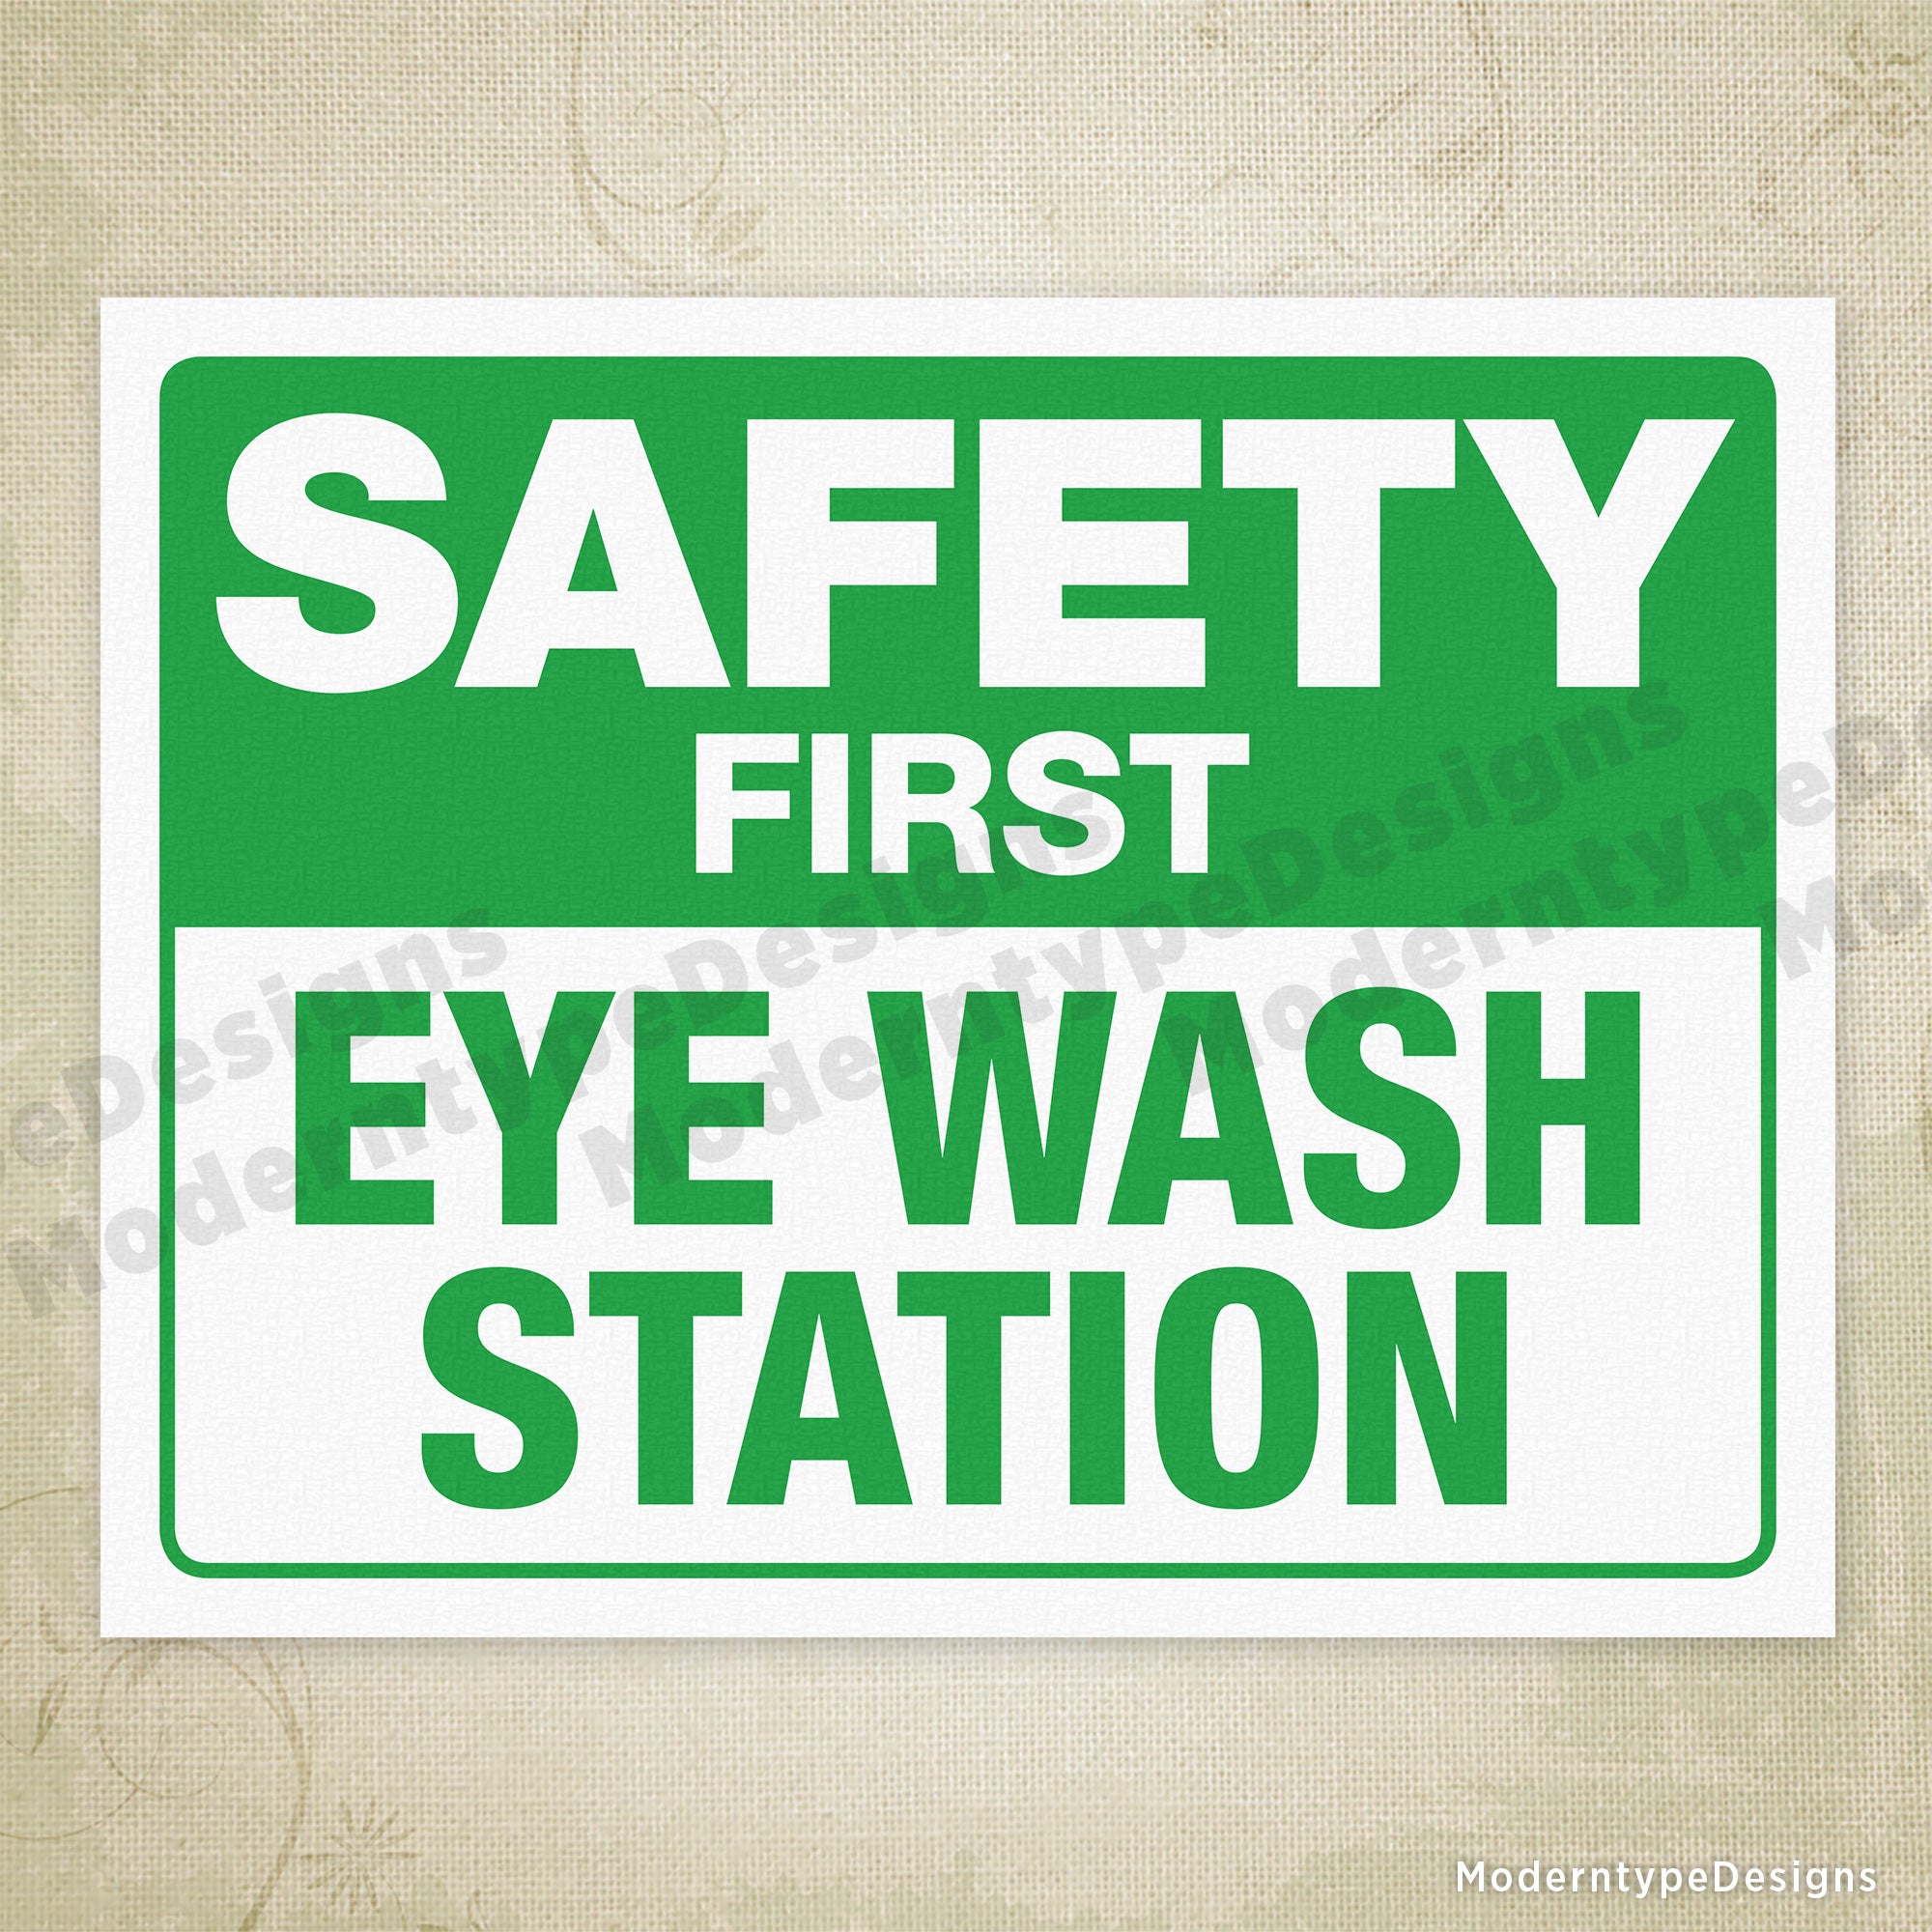 Eye Wash Station Archives - UniFirst First Aid + Safety